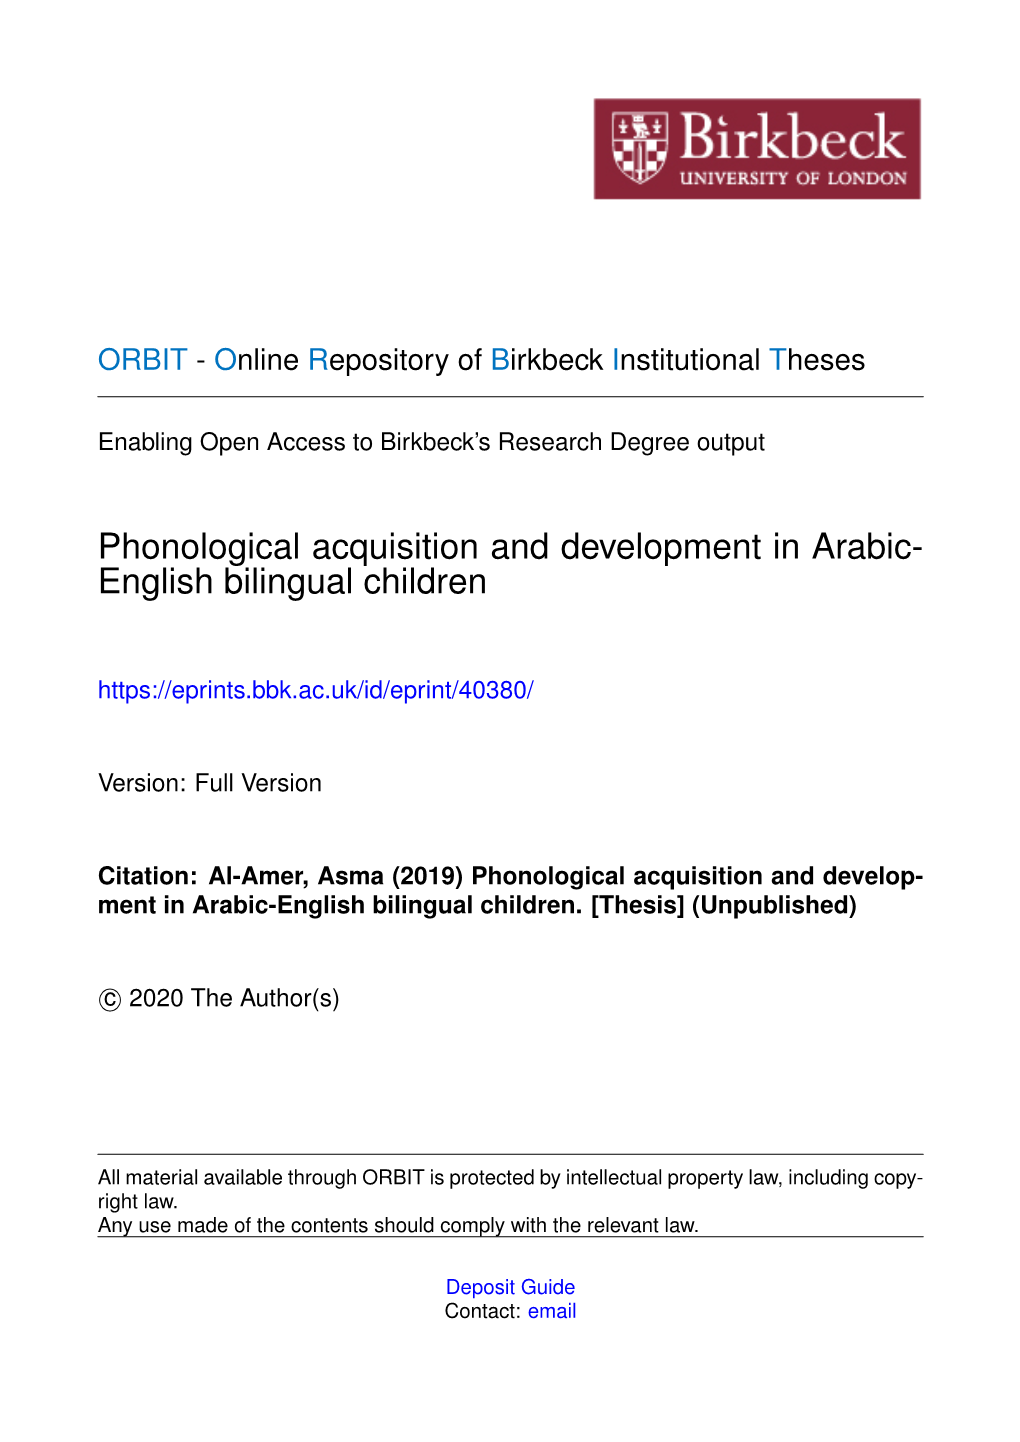 Phonological Acquisition and Development in Arabic- English Bilingual Children